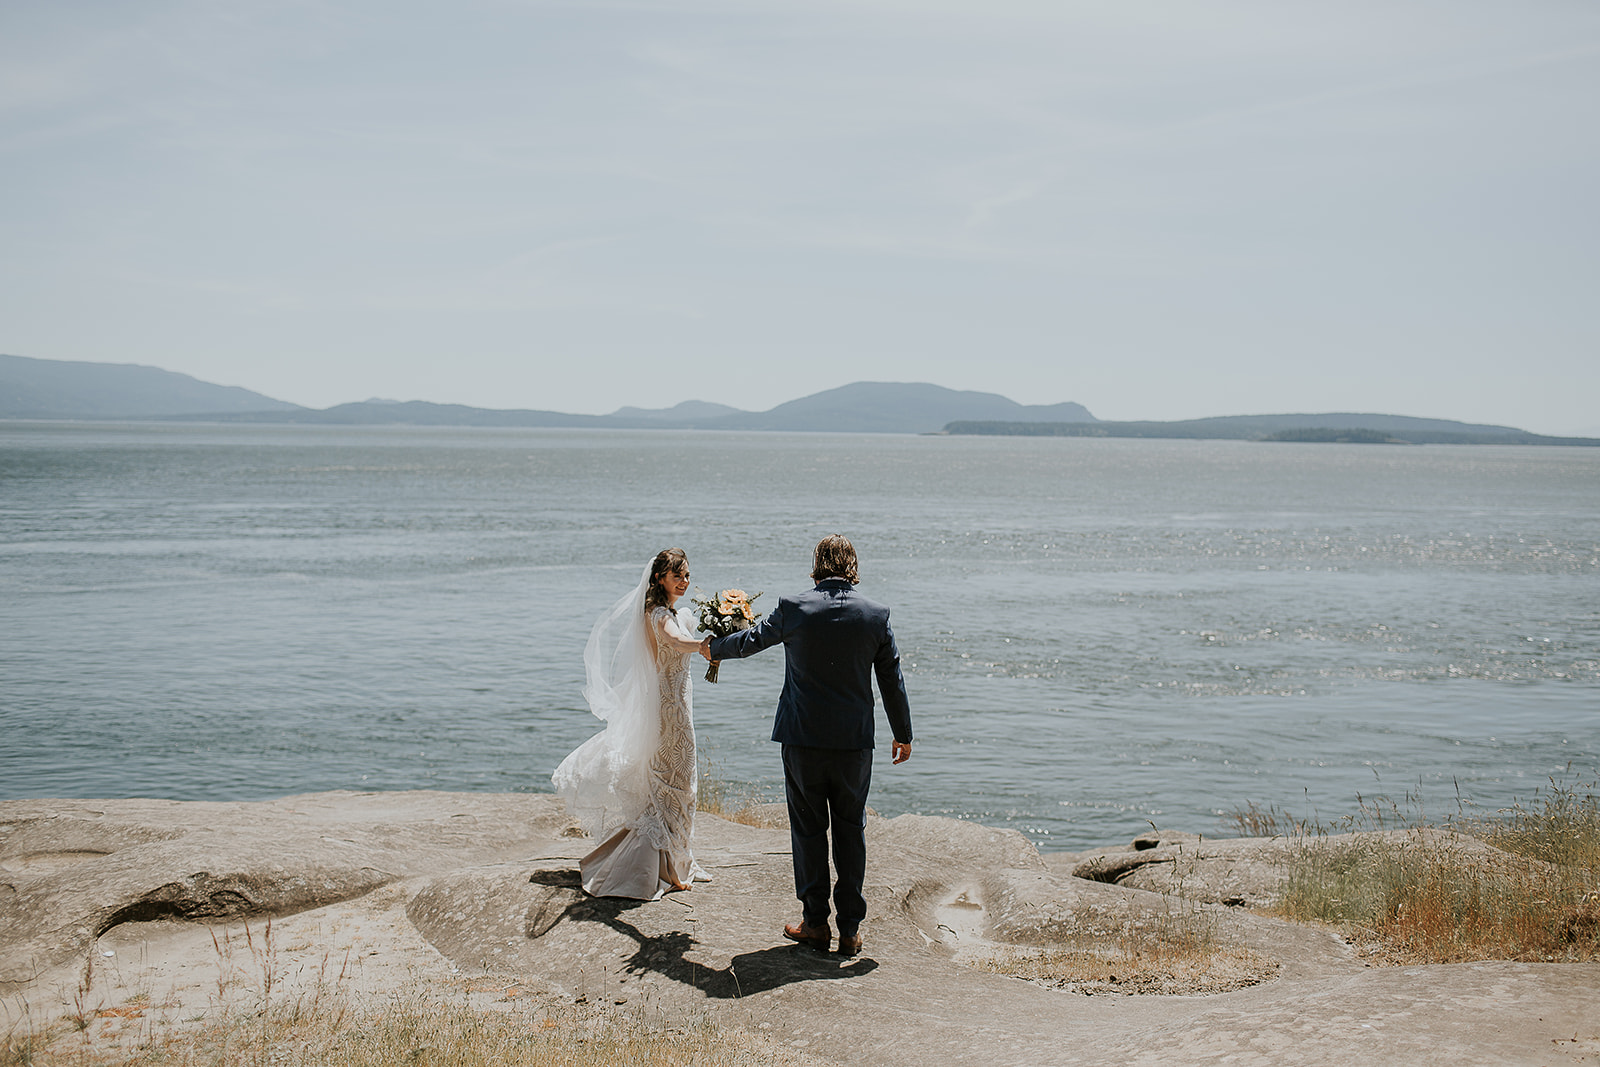 a groom admiring his bride overlooking the ocean and mountains on Saturna Island